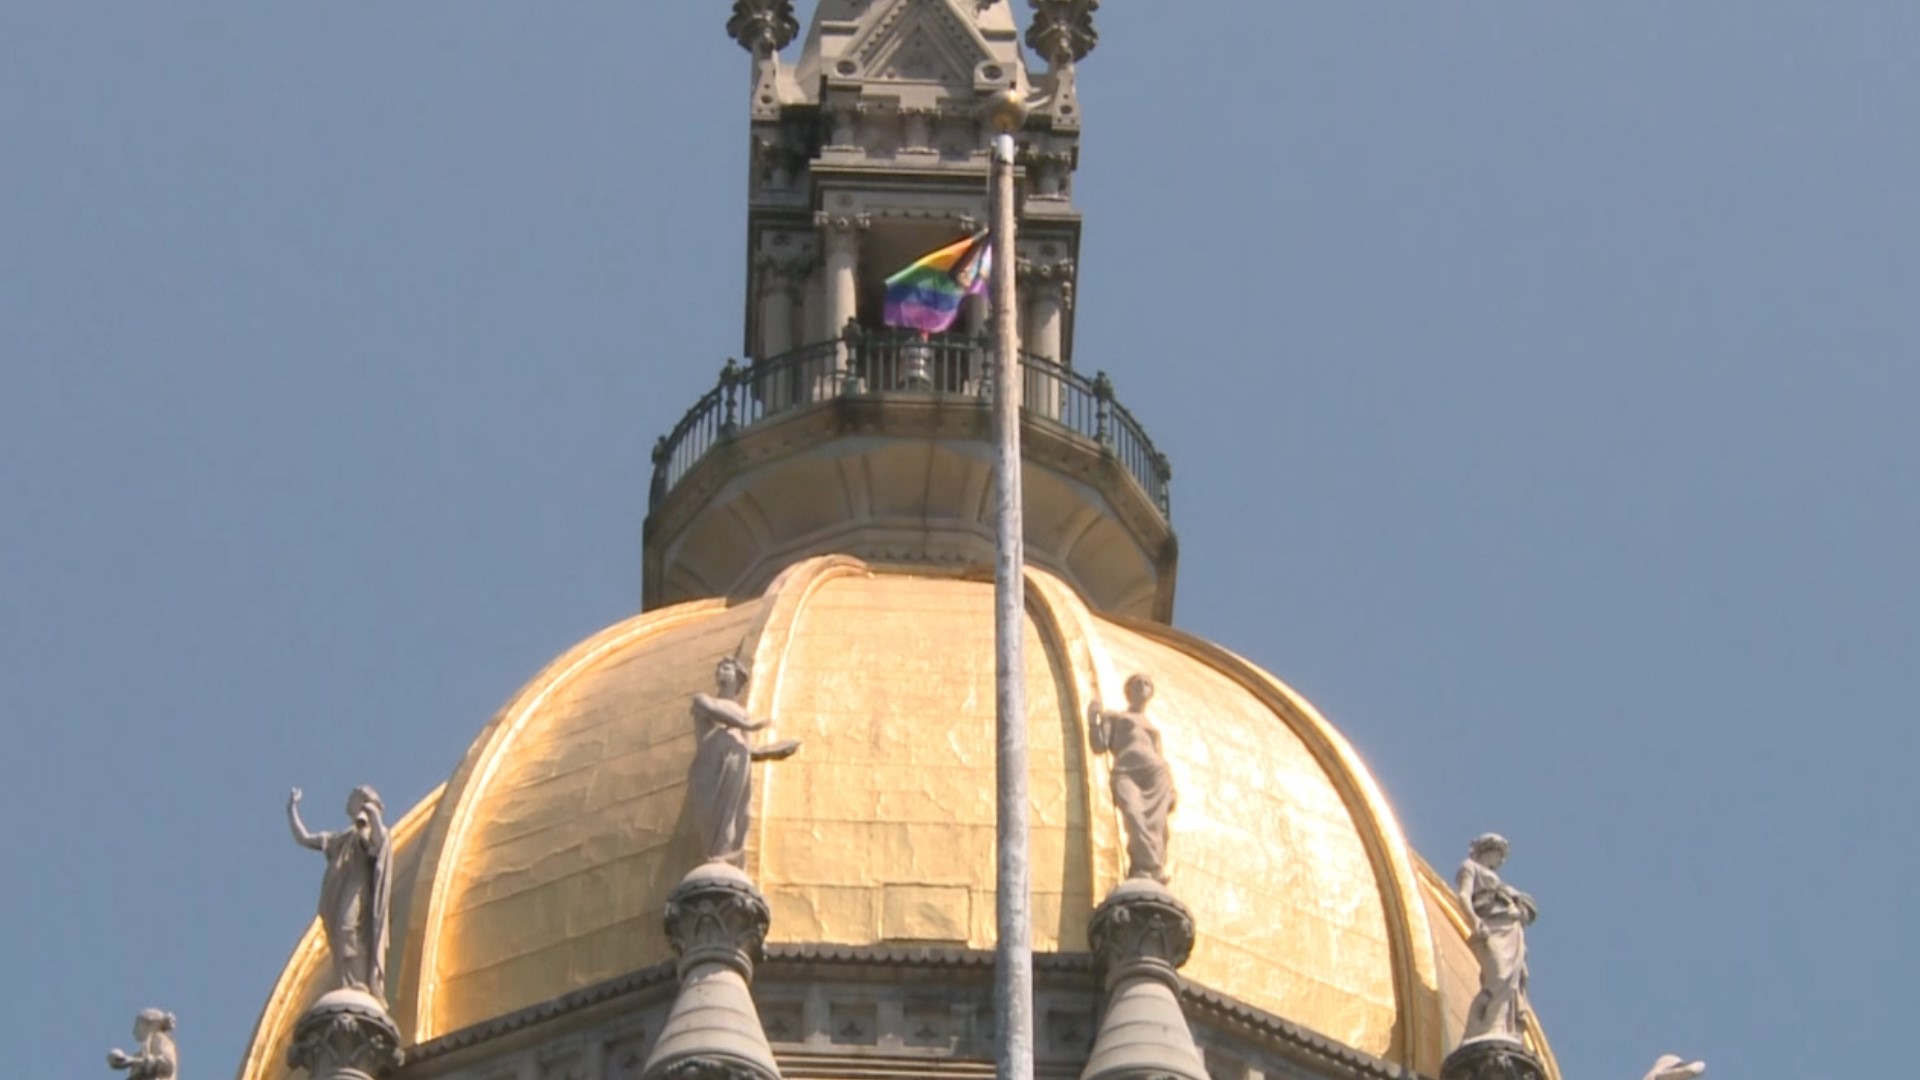 To kick off Pride Month in Connecticut, the Pride flag now flies above the State Capitol Building. Supporters said it sends an essential message to the nation.